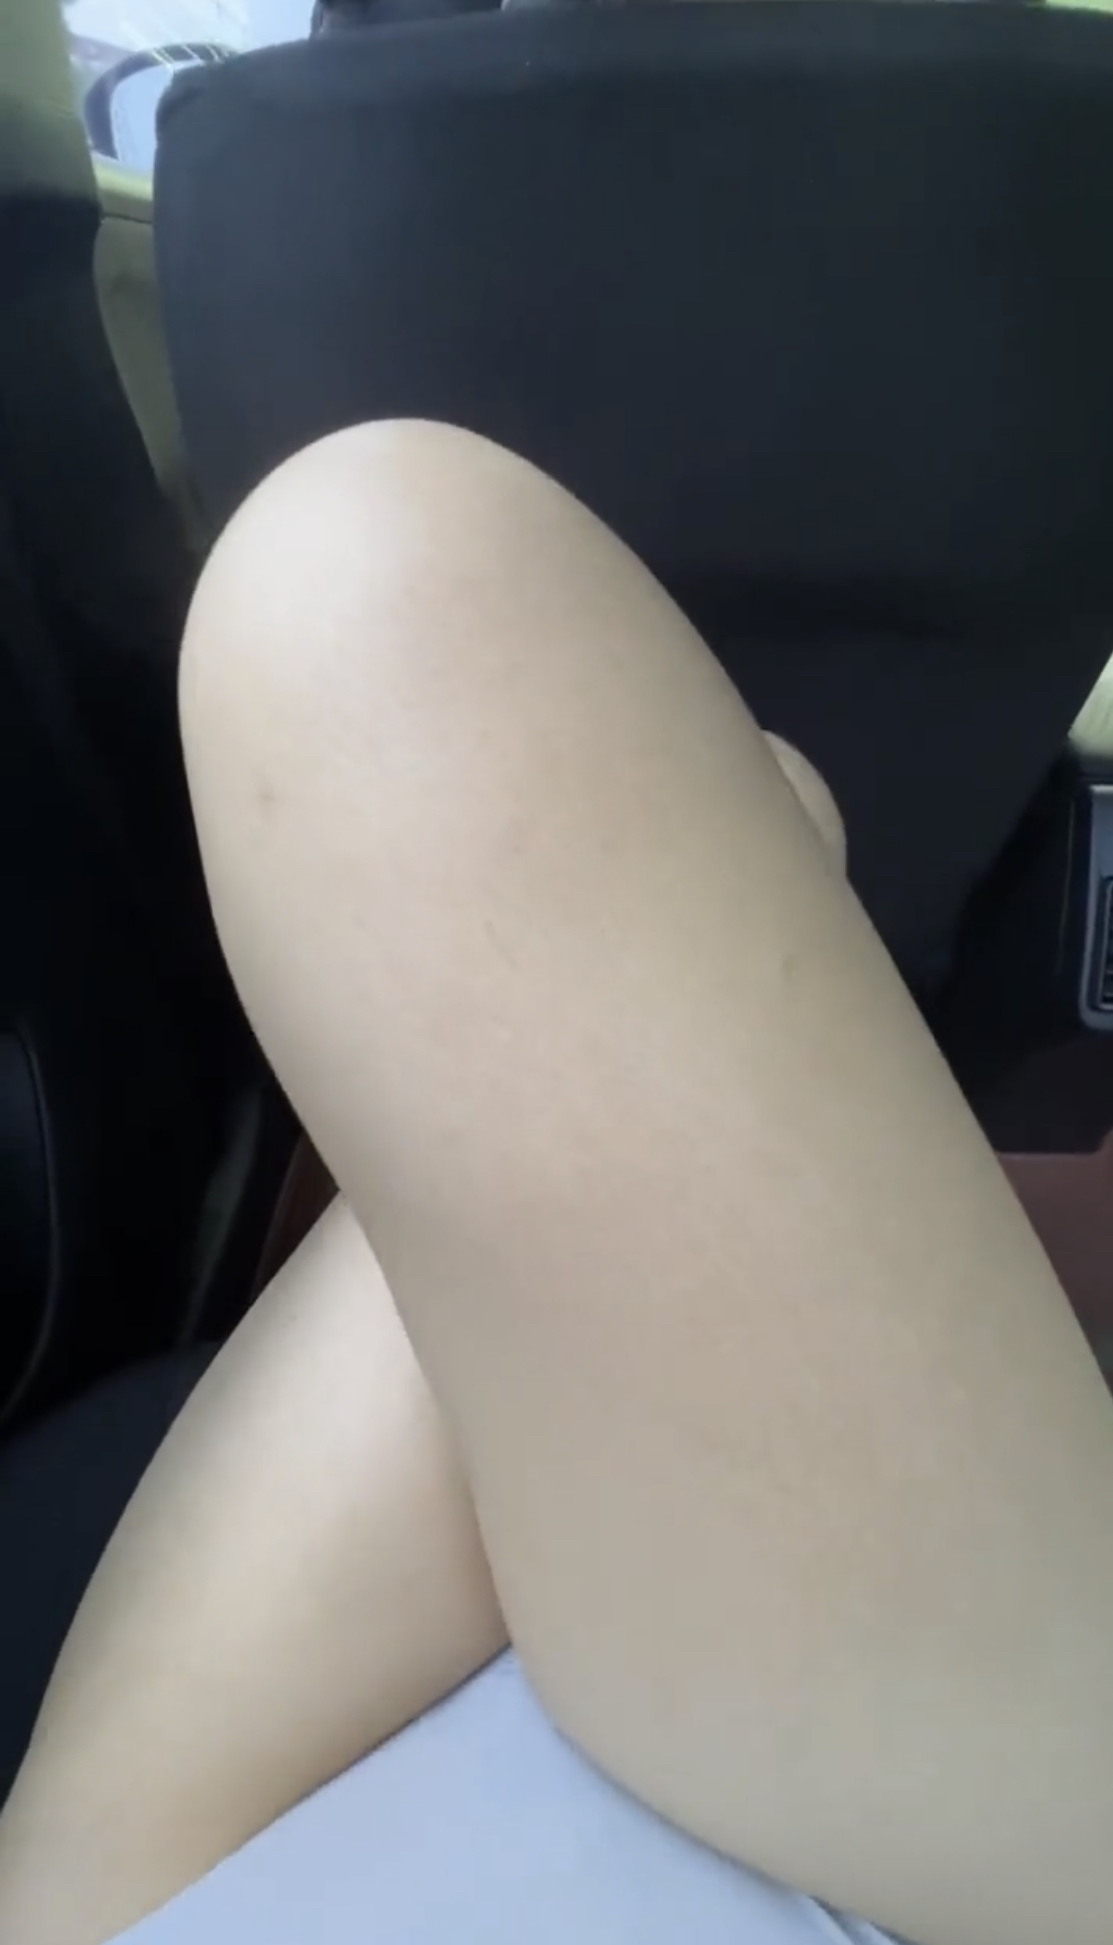 Chinese girl syntribation in a uber part 1